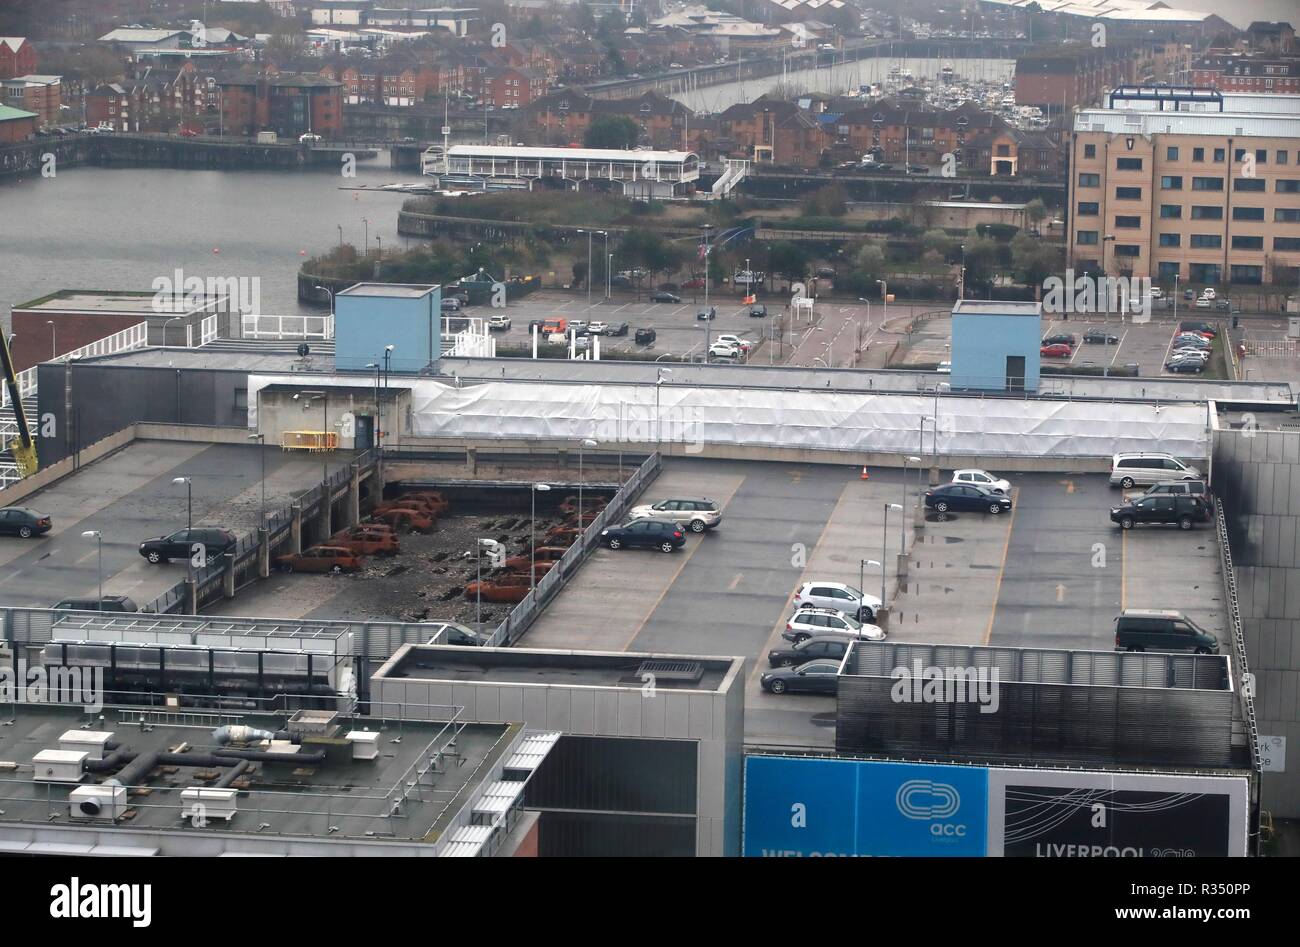 A view of the multi-storey Liverpool Waterfront Car Park near to the Echo Arena which was destroyed by fire on New Year’s Eve 2017. Work starts on Wednesday to remove almost 1200 cars which were caught in the blaze and to demolish the seven-storey car park. Stock Photo